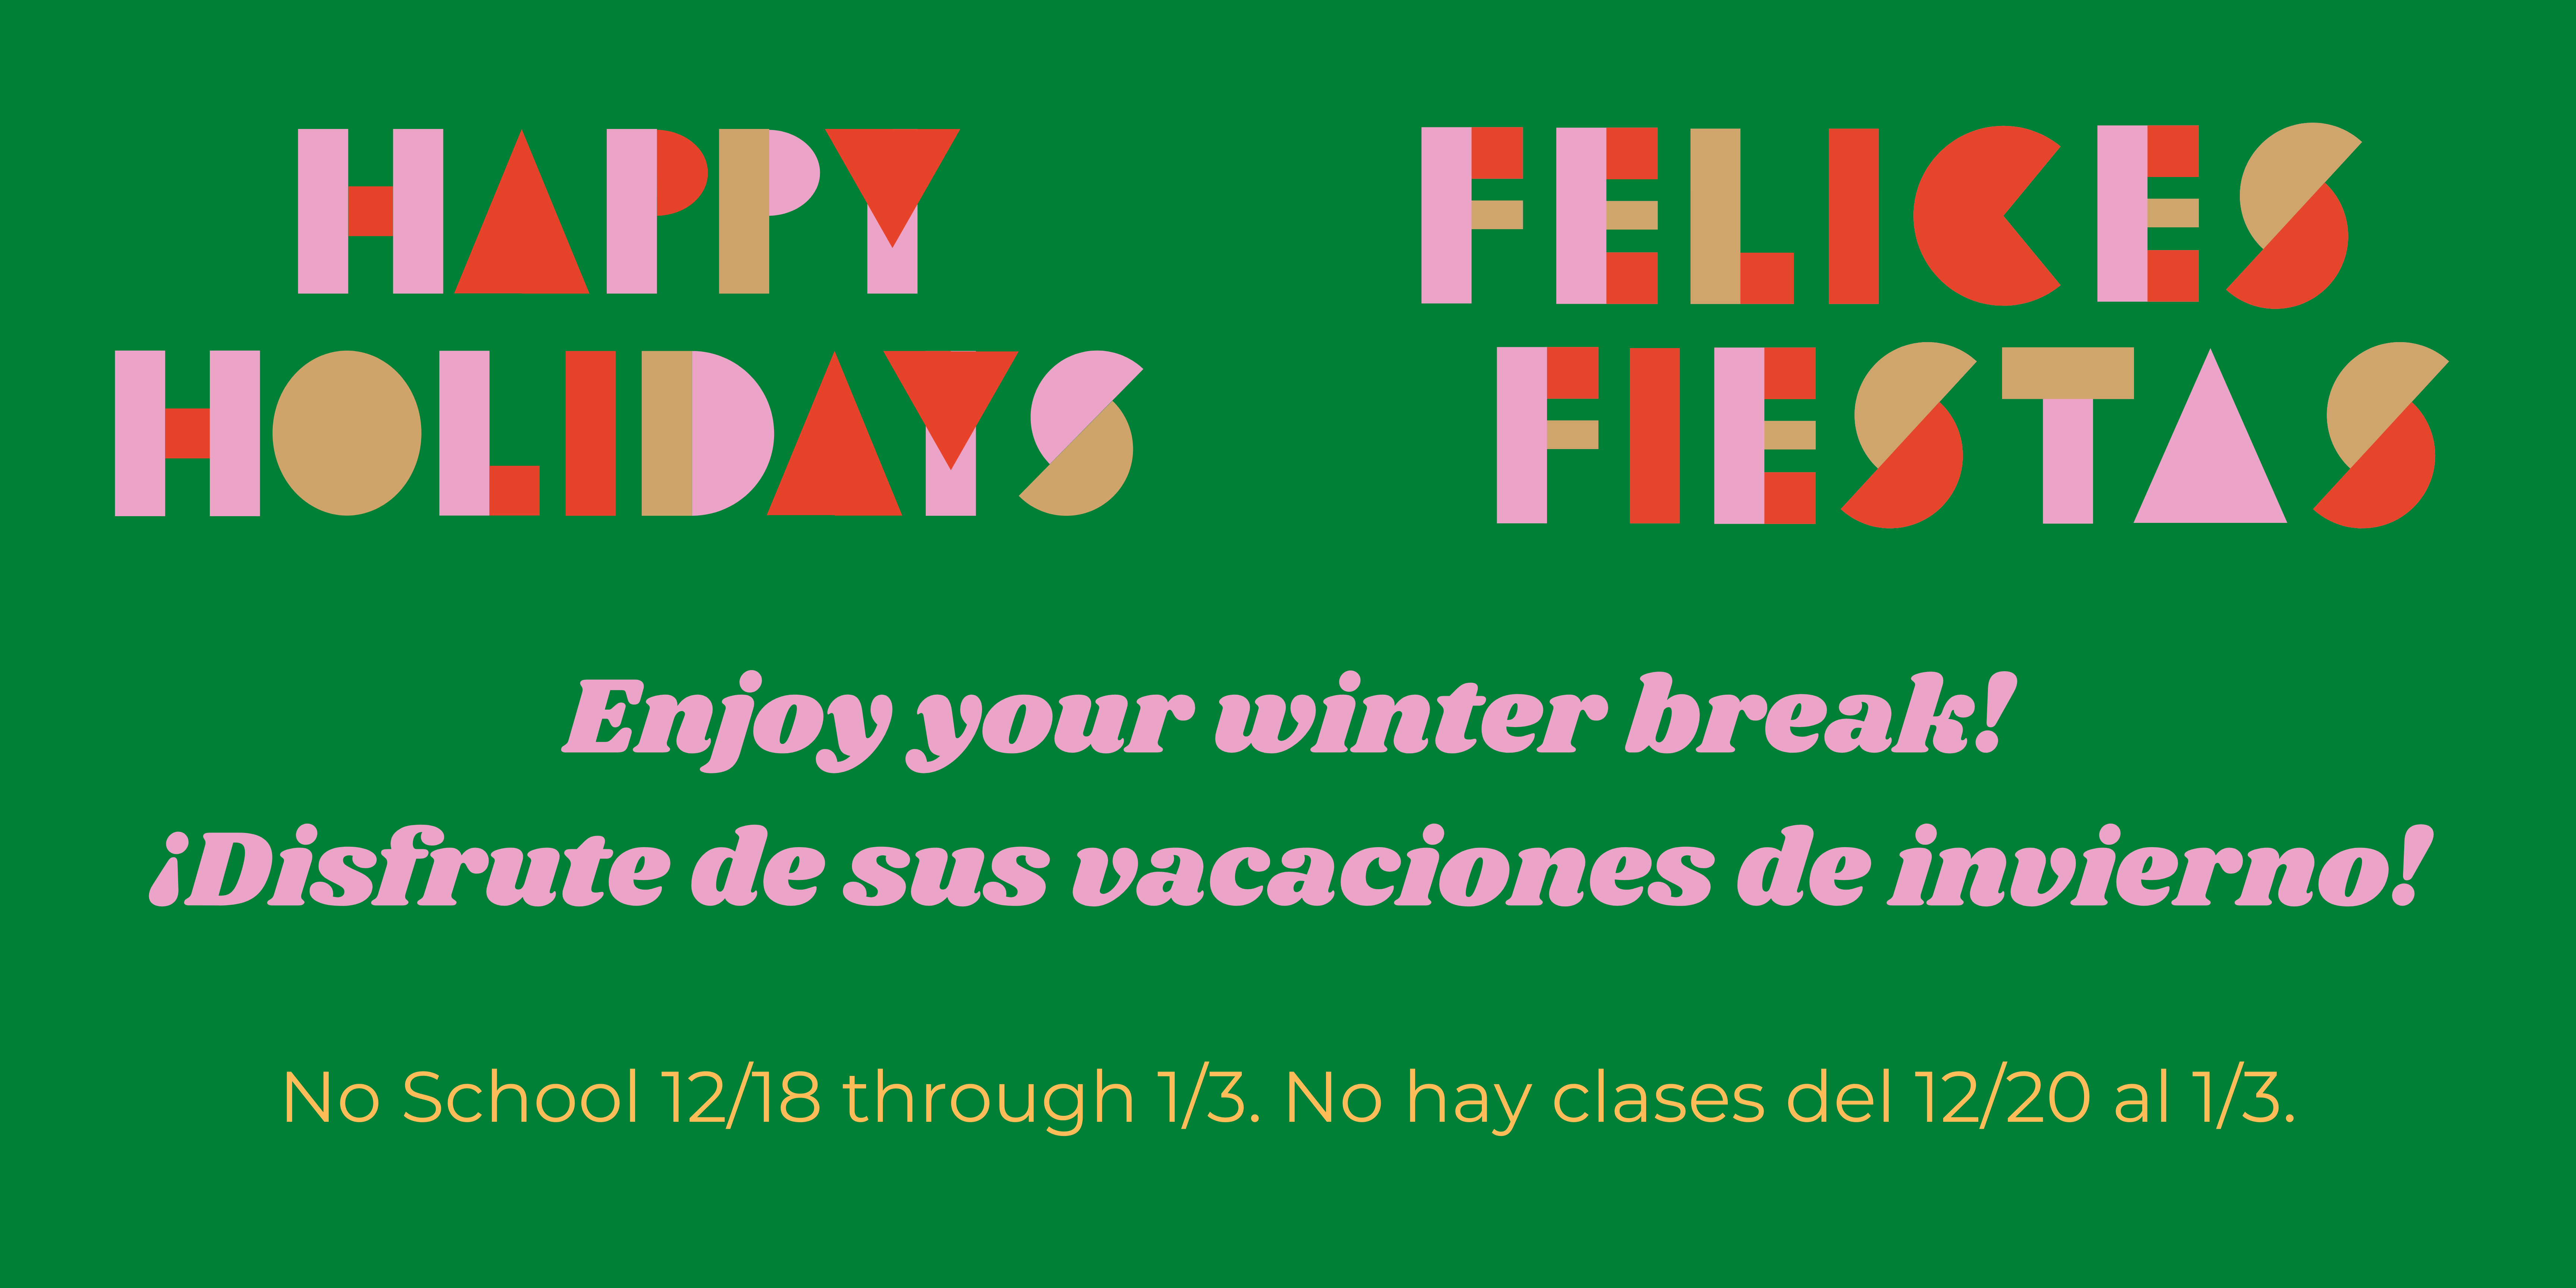 Banner with green background and pink, red, and brown Happy Holidays / Felices Fiestas